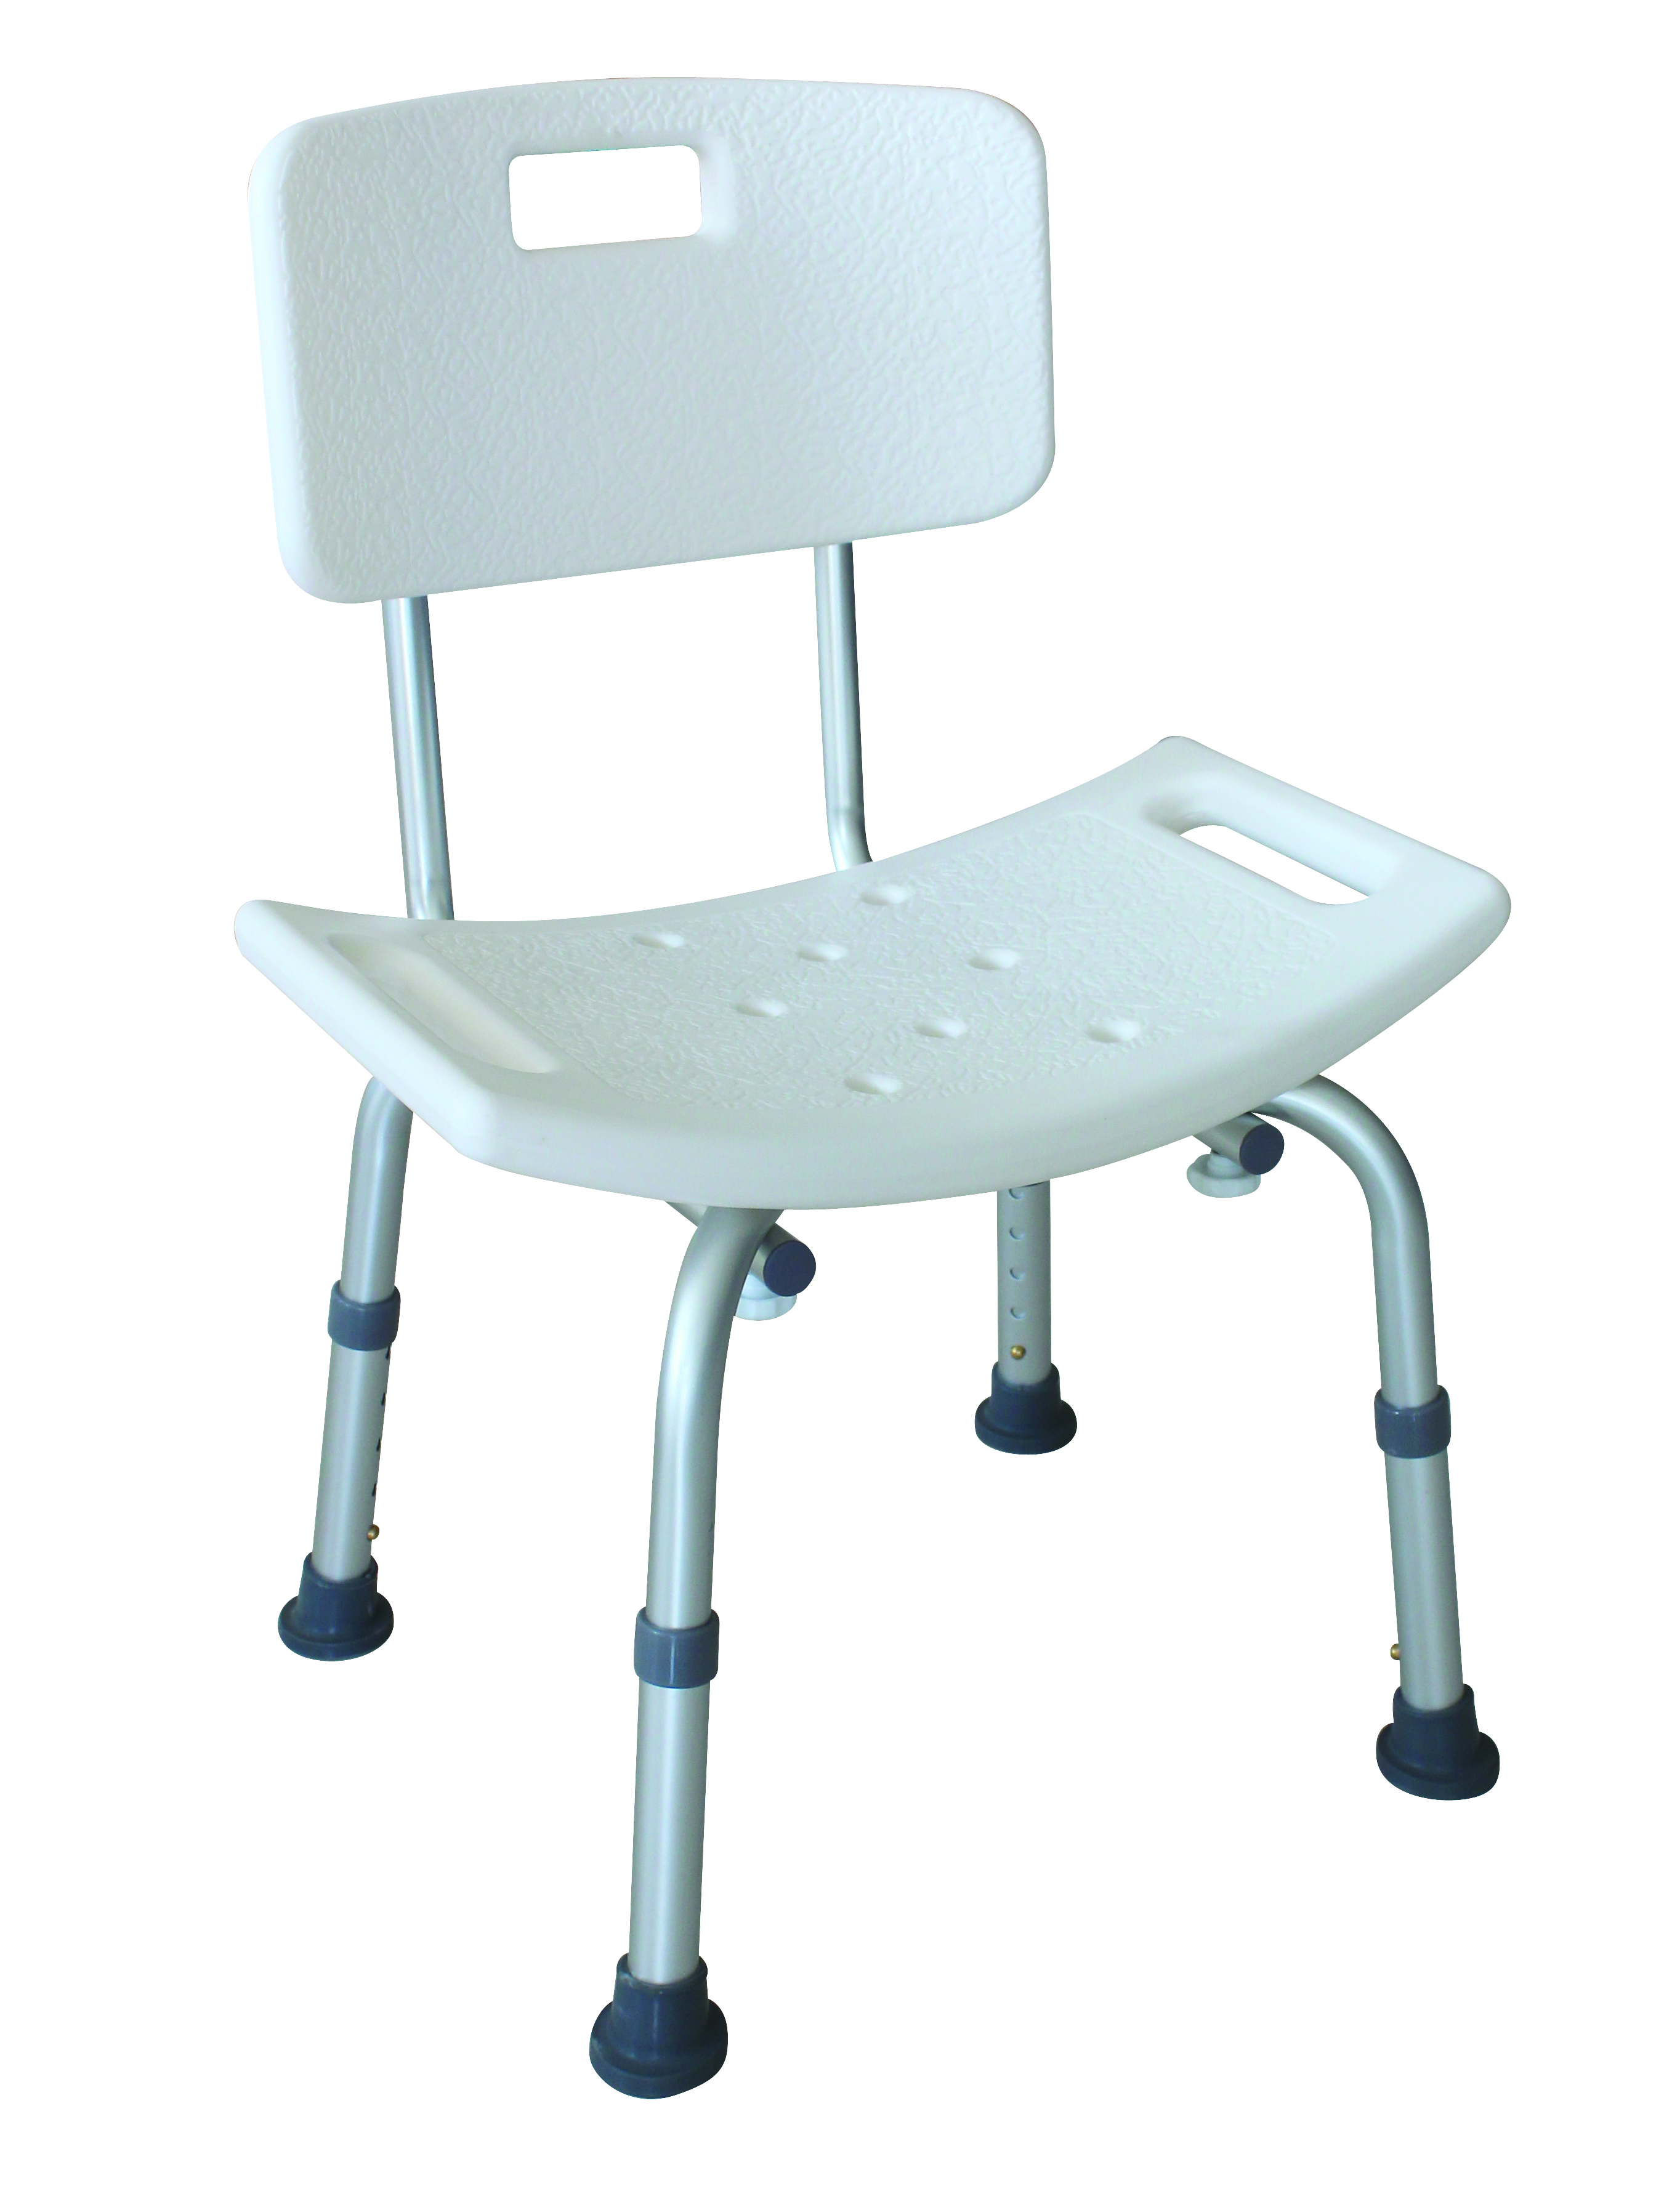 BAT-01 Romed aluminium bath chair, with backrest, dripping holes and anti skidding pad, per piece in a carton.